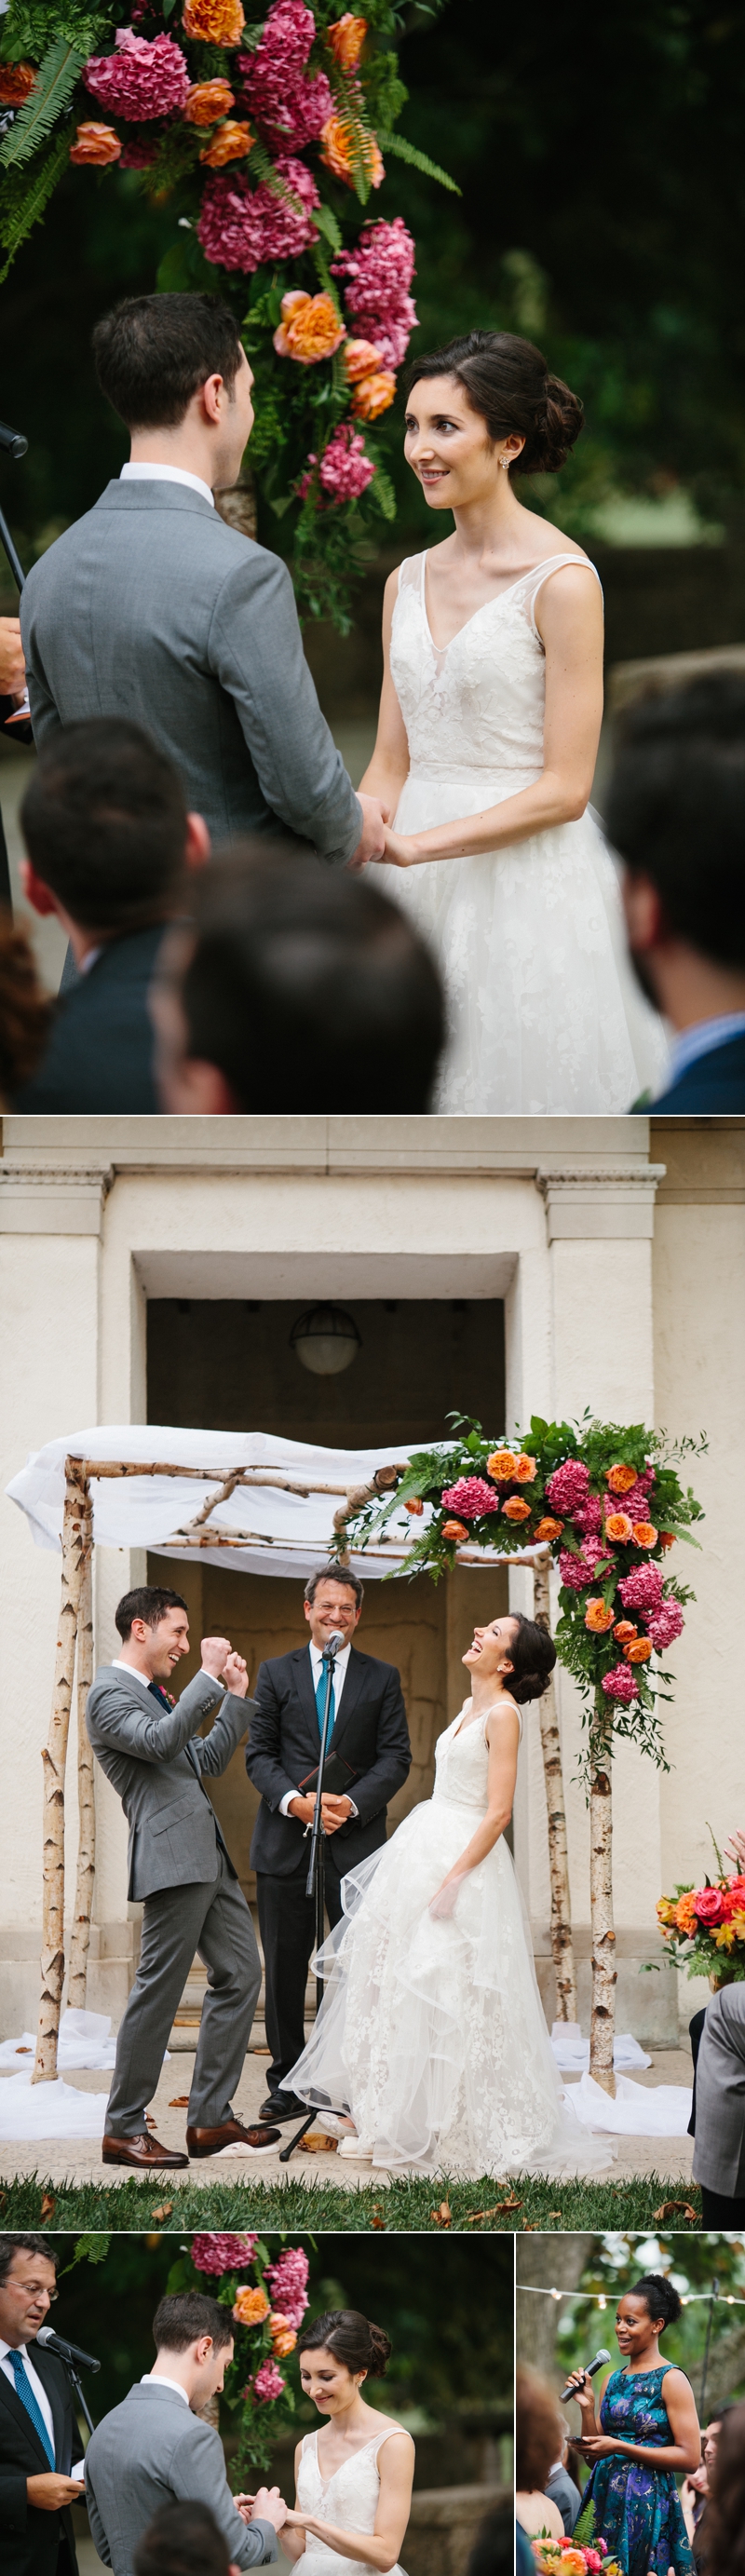 A series of photos showing the gorgeous outdoor wedding ceremony at the American Swedish Museum.